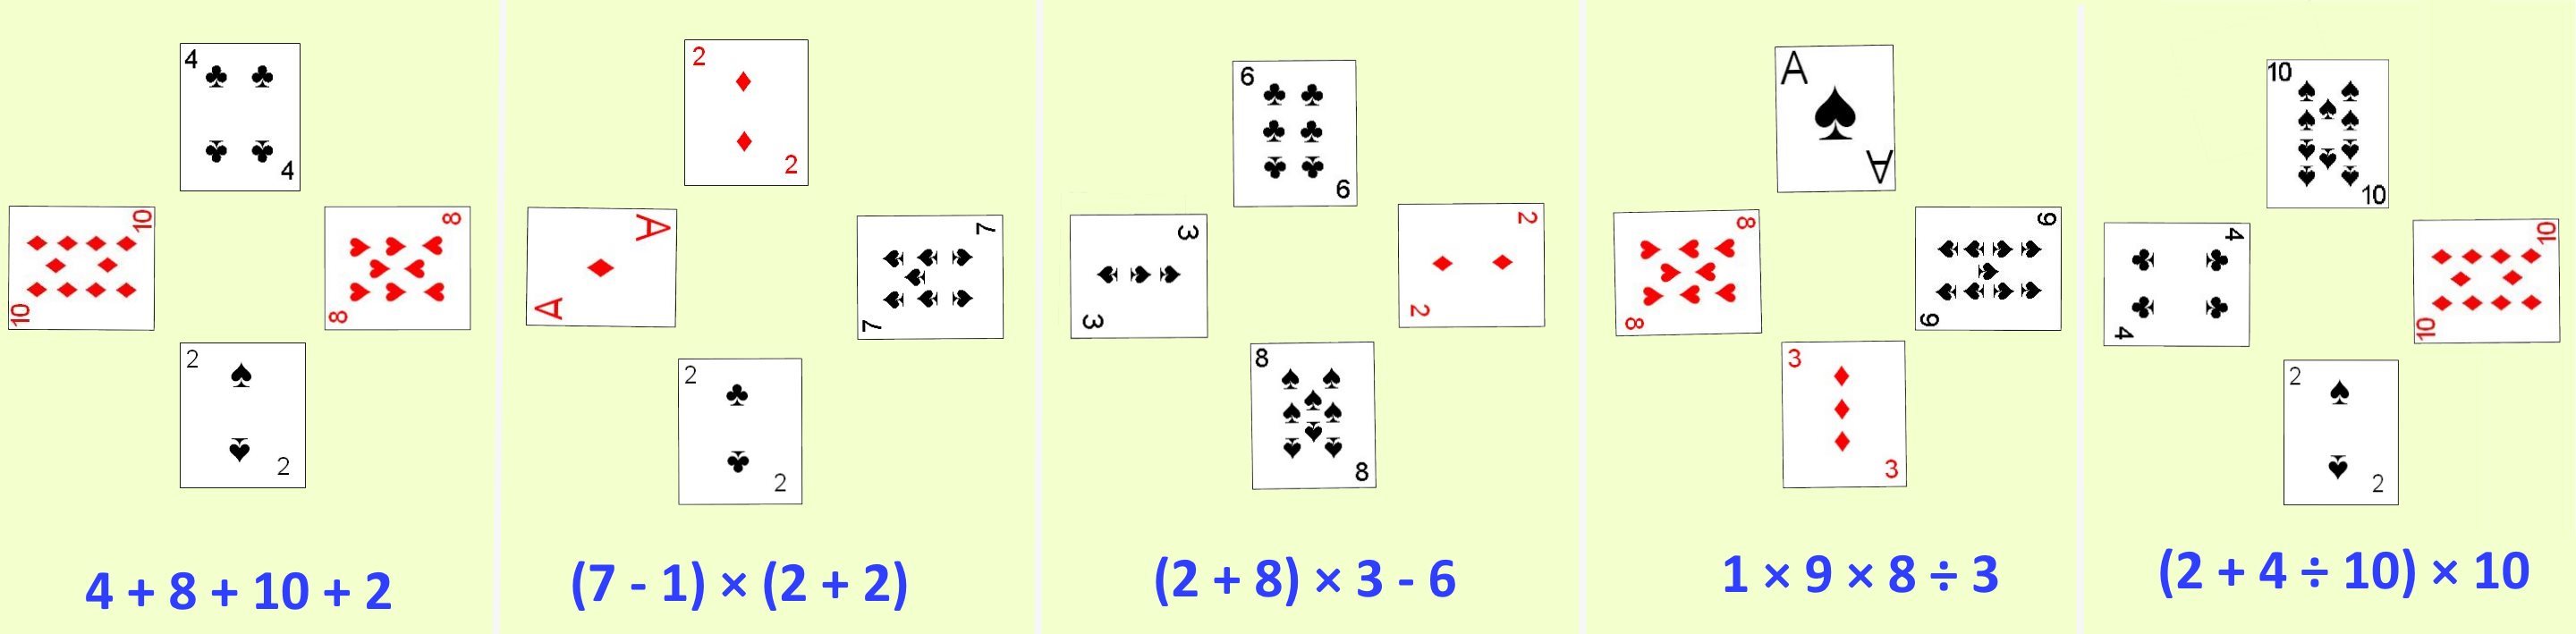 Example of valid combinations equalling 24